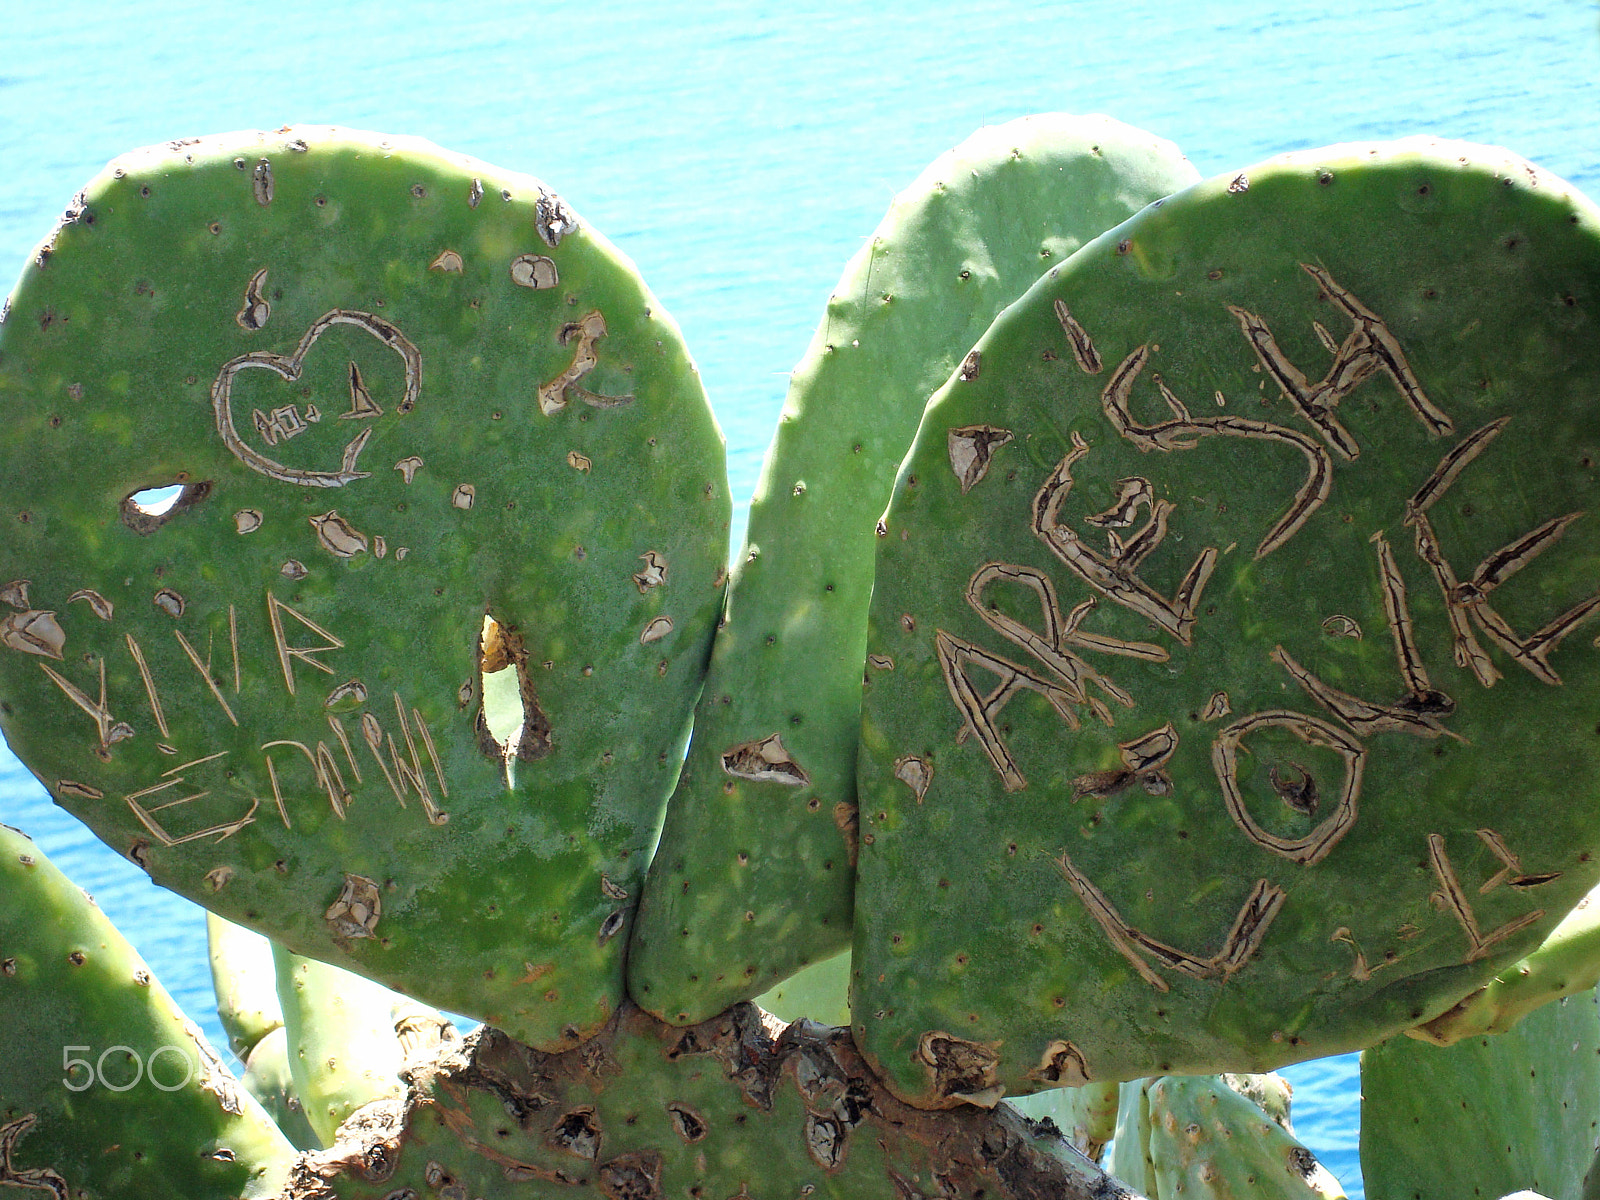 Sony Cyber-shot DSC-W110 sample photo. The inscriptions on the leaves of the old cactus photography